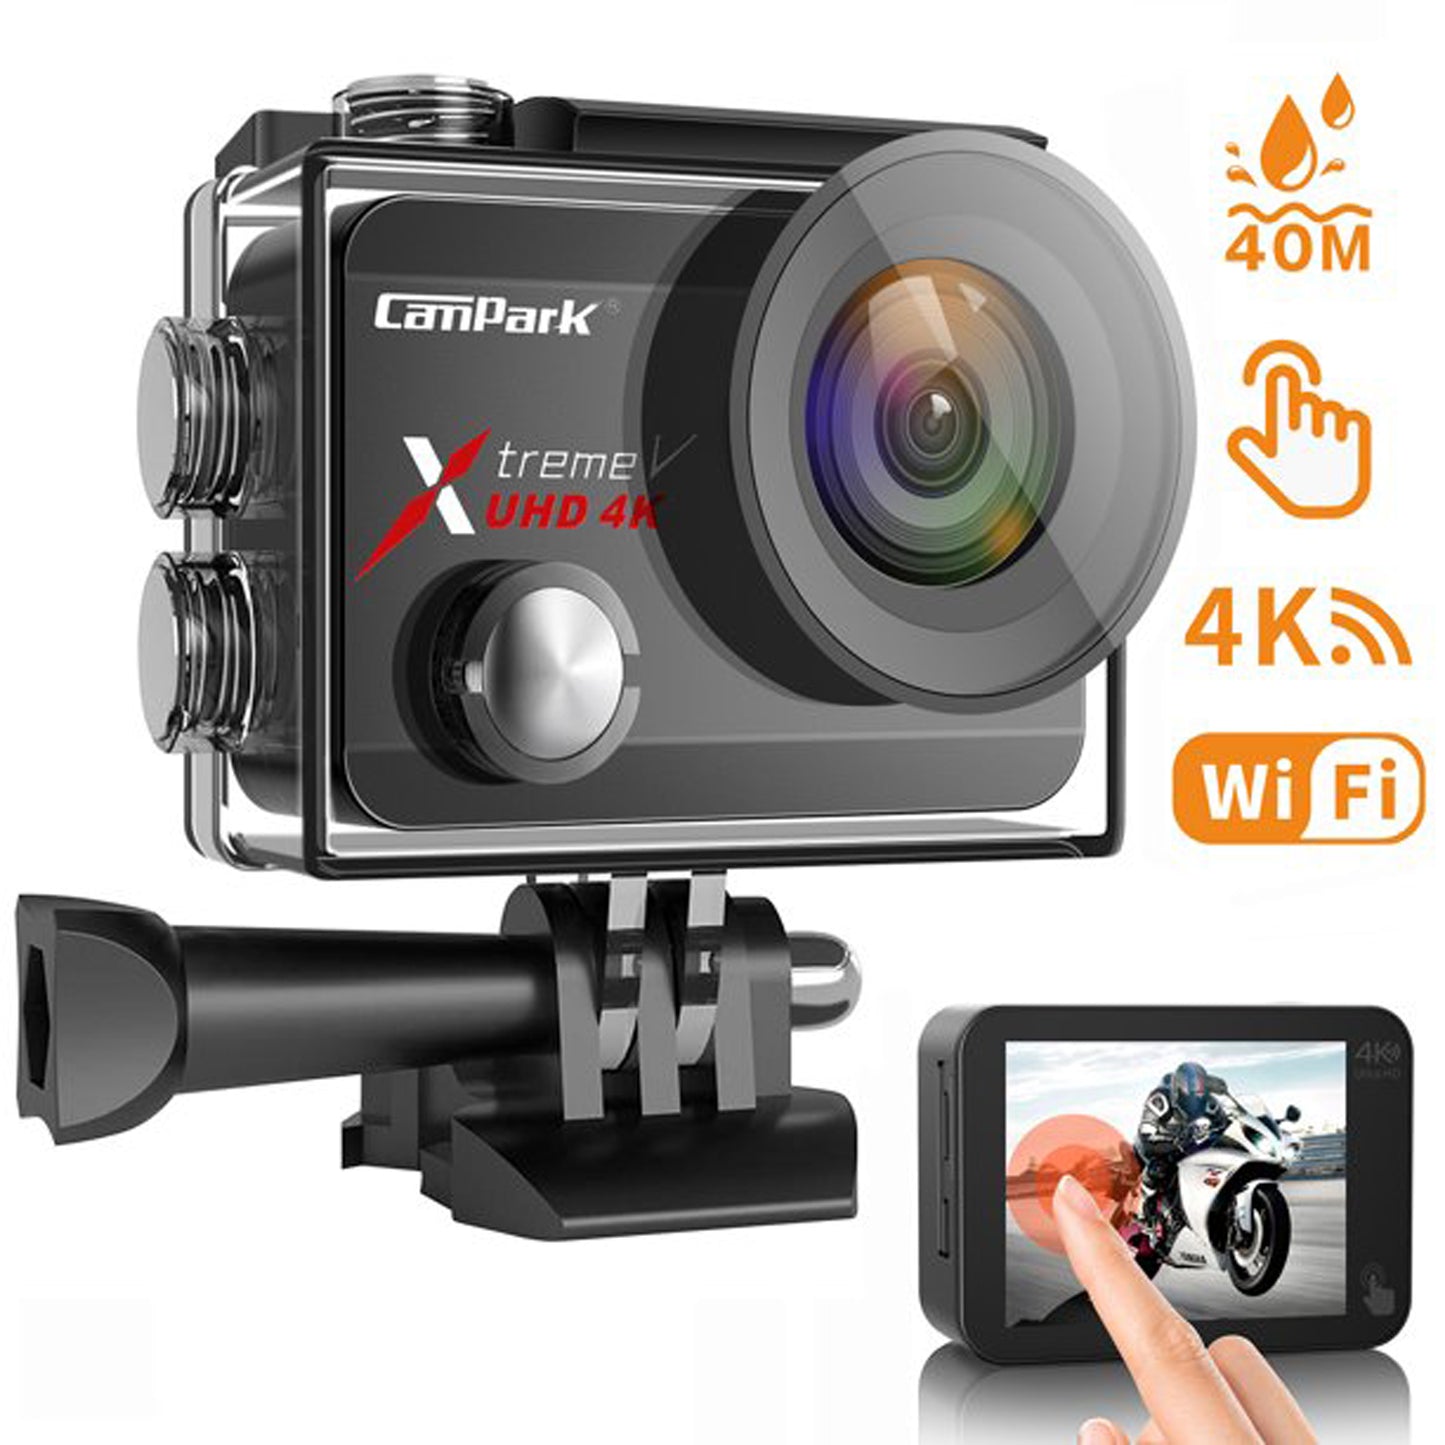 Campark Action Camera 4K 60FPS 20MP Sport camera WiFi Waterproof Underwater Camera 2'' Touch Screen GoPro Compatible Accessories Kits Video Vlogging Record camera